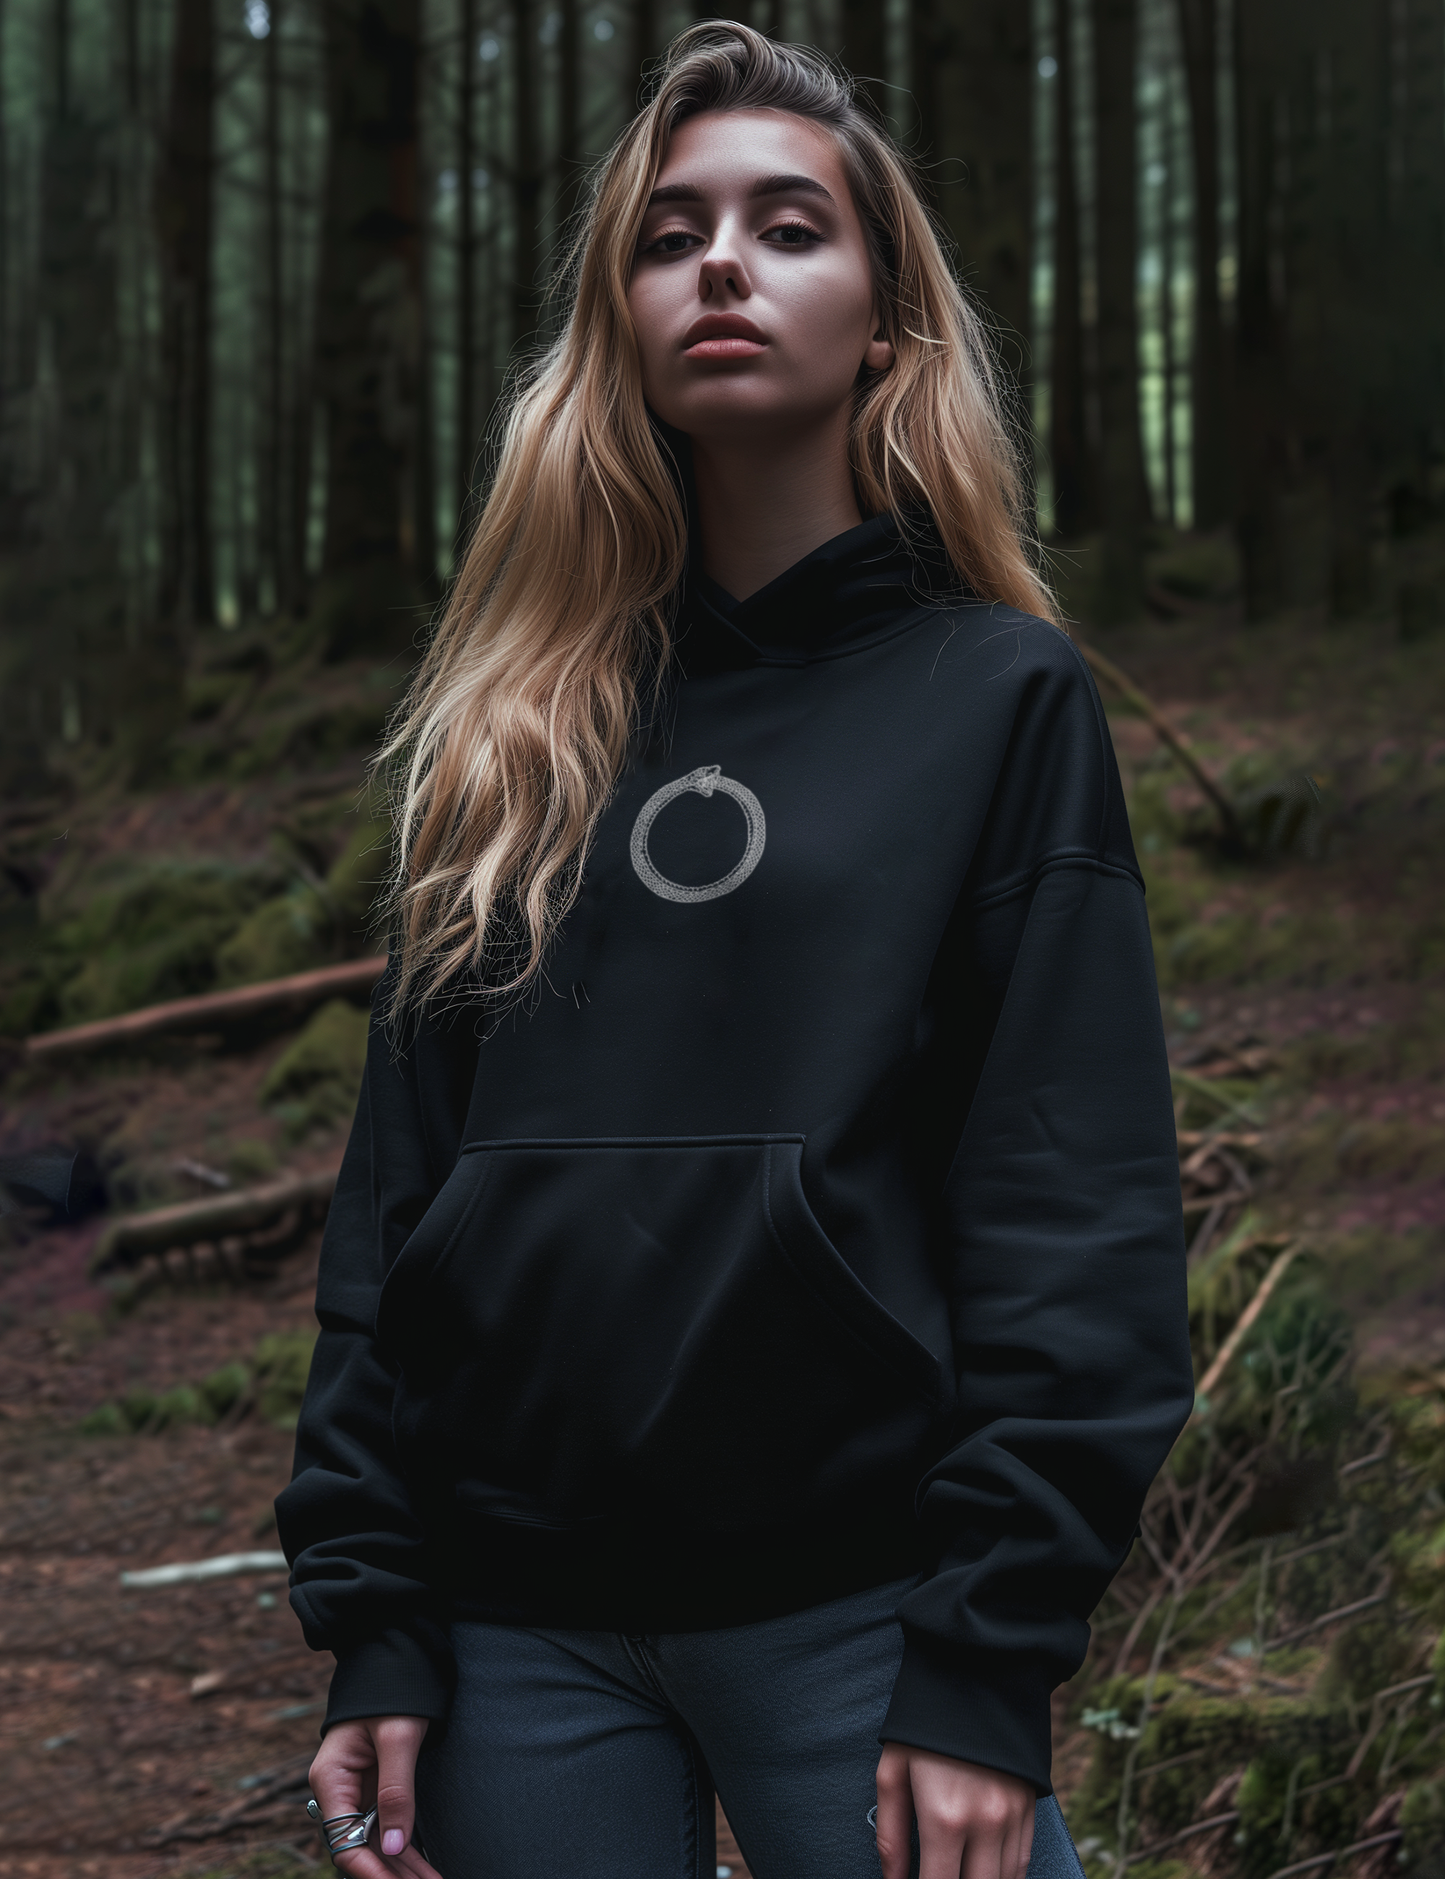 Ouroboros Occult Esoteric Plus Size Goth Snake Hoodie